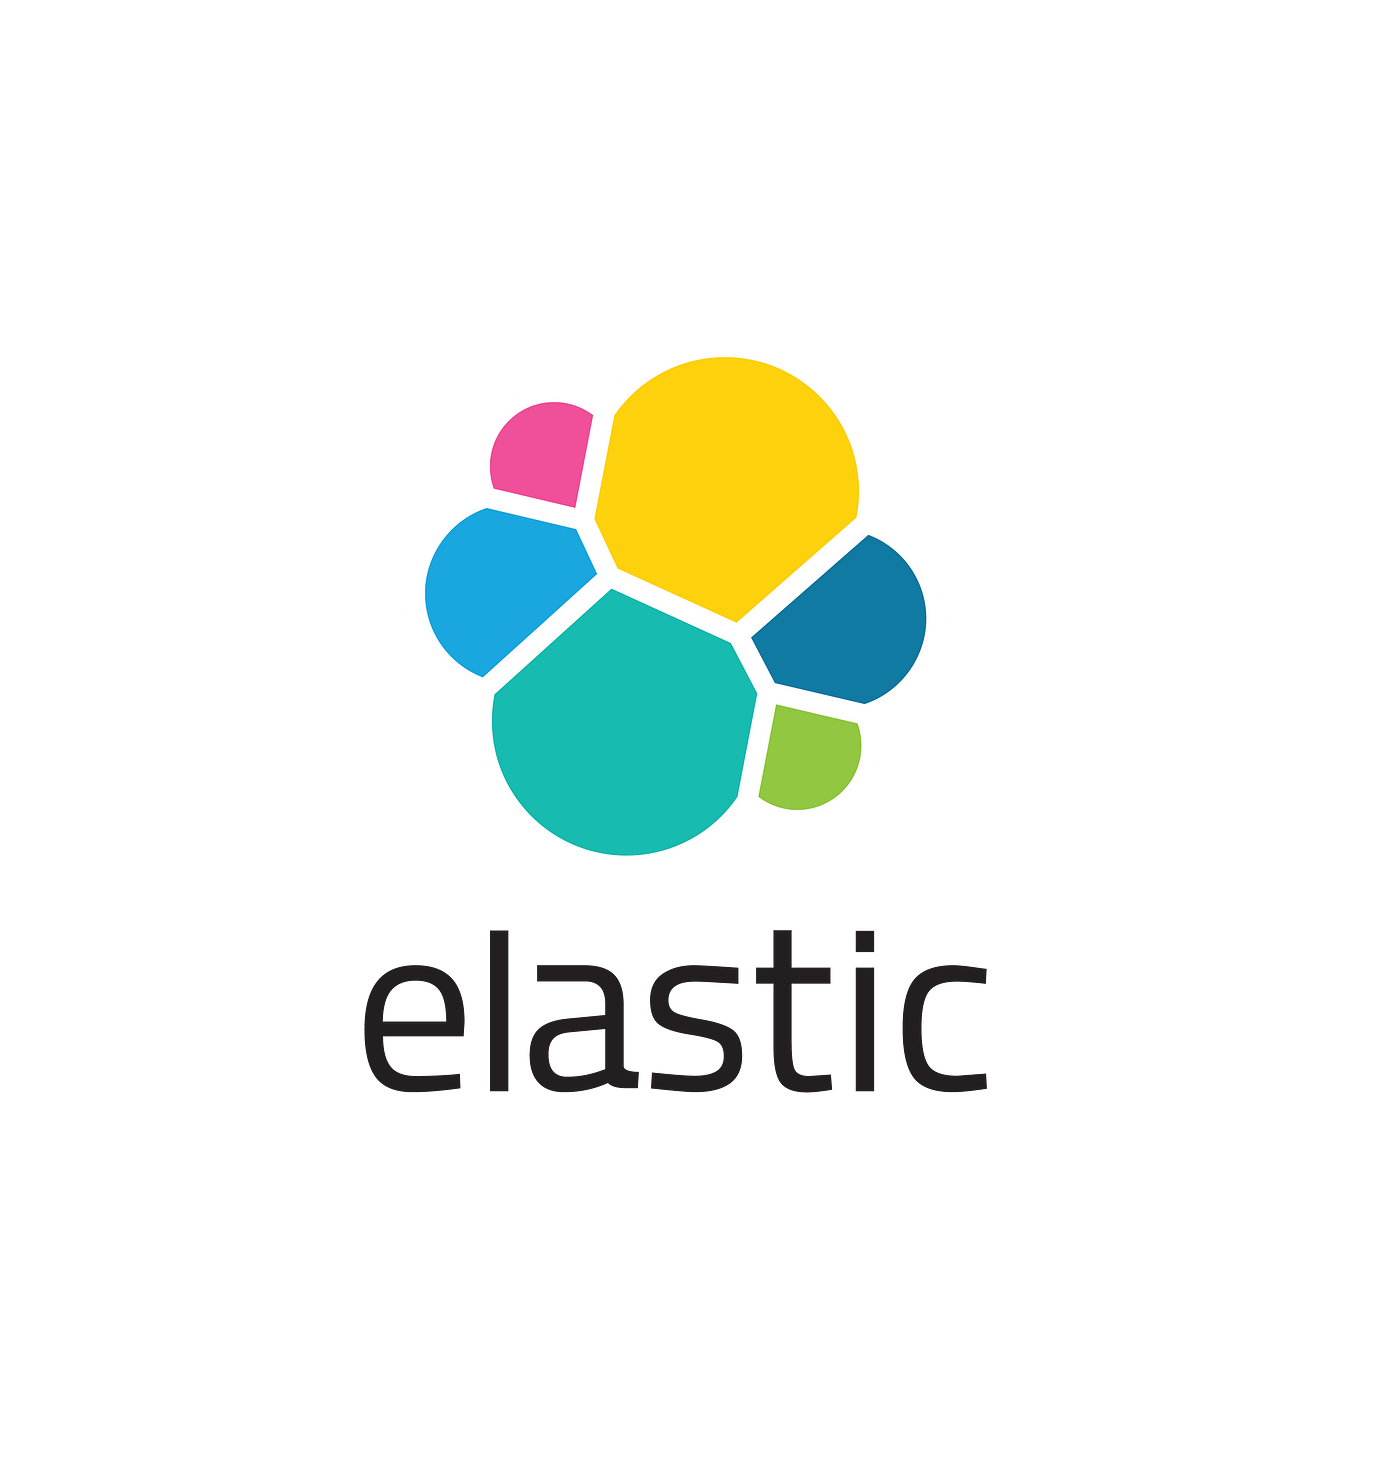 ElasticSearch Introduction. ElasticSearch is a document-oriented